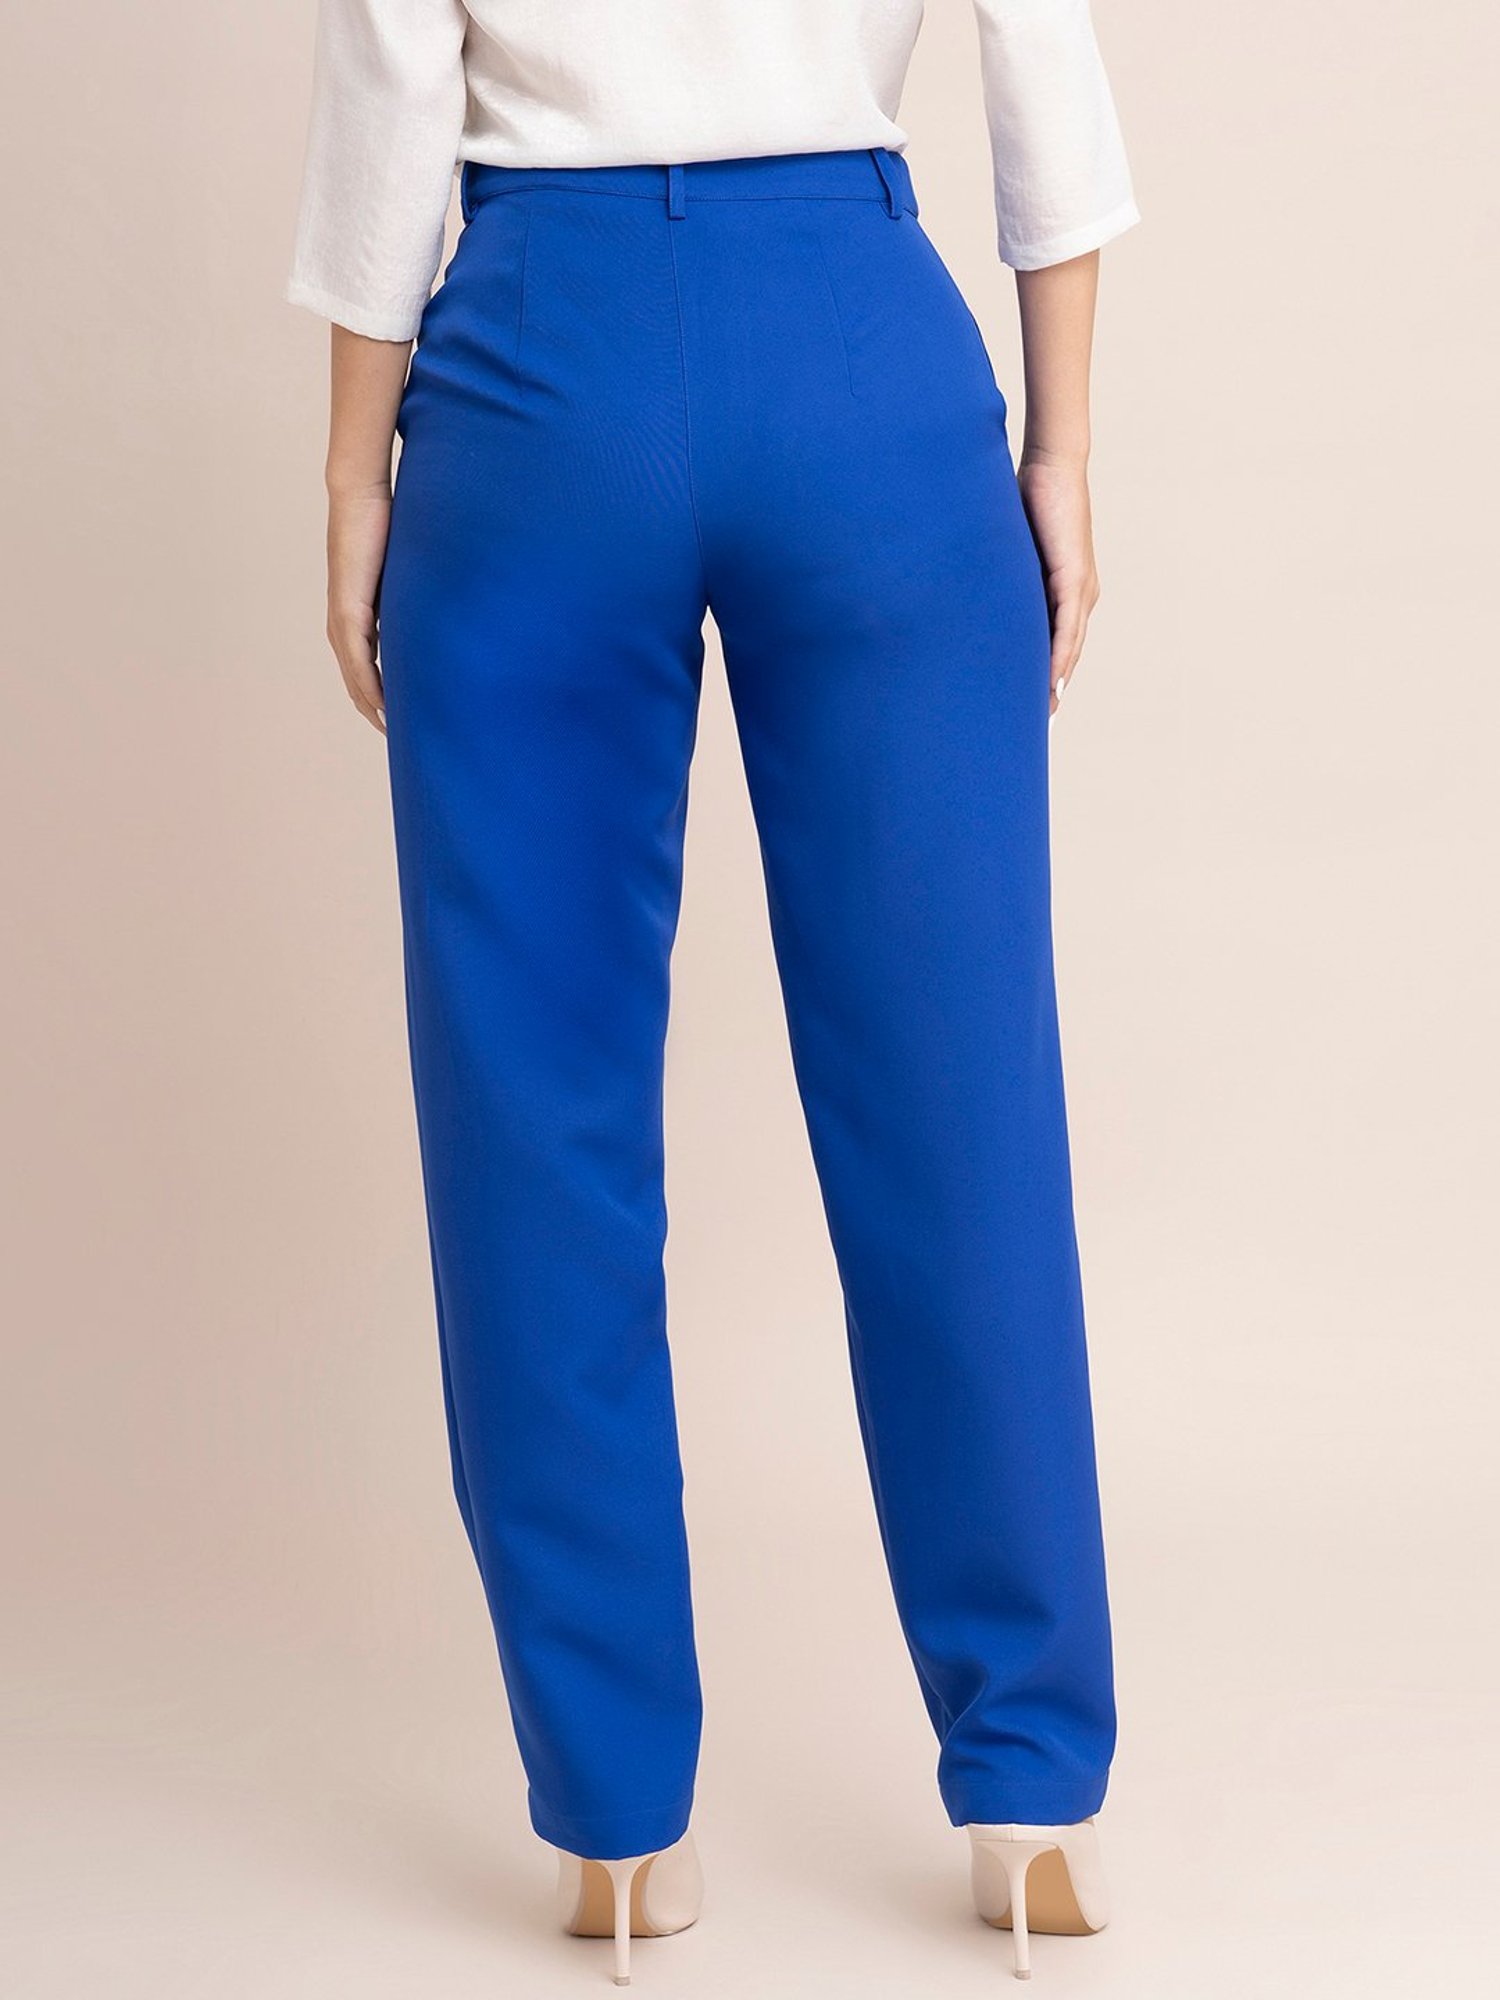 LUX LYRA Slim Fit Women Light Blue Trousers - Buy LUX LYRA Slim Fit Women  Light Blue Trousers Online at Best Prices in India | Flipkart.com